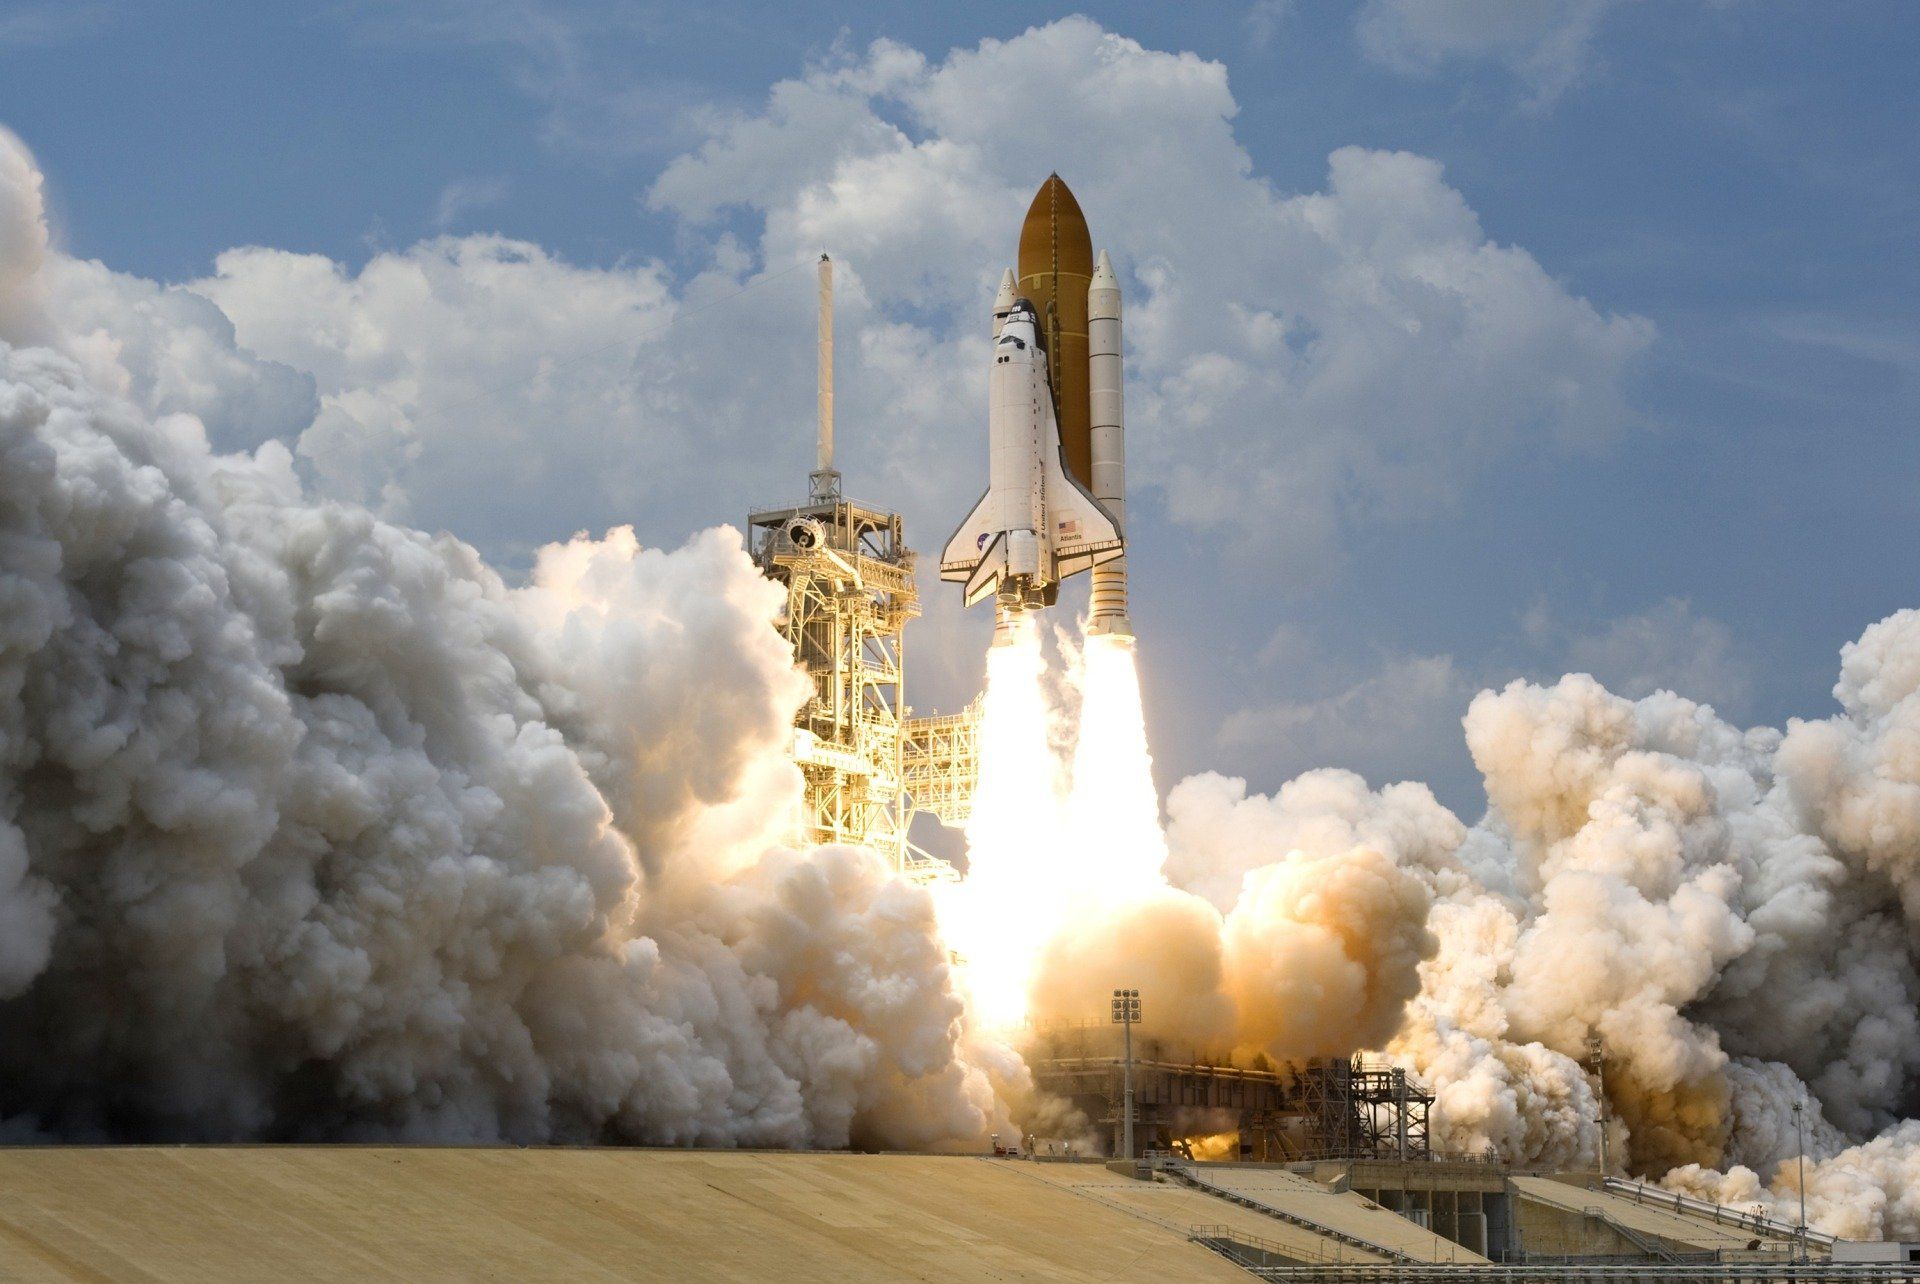 US Space Shuttle lifting off from launch site